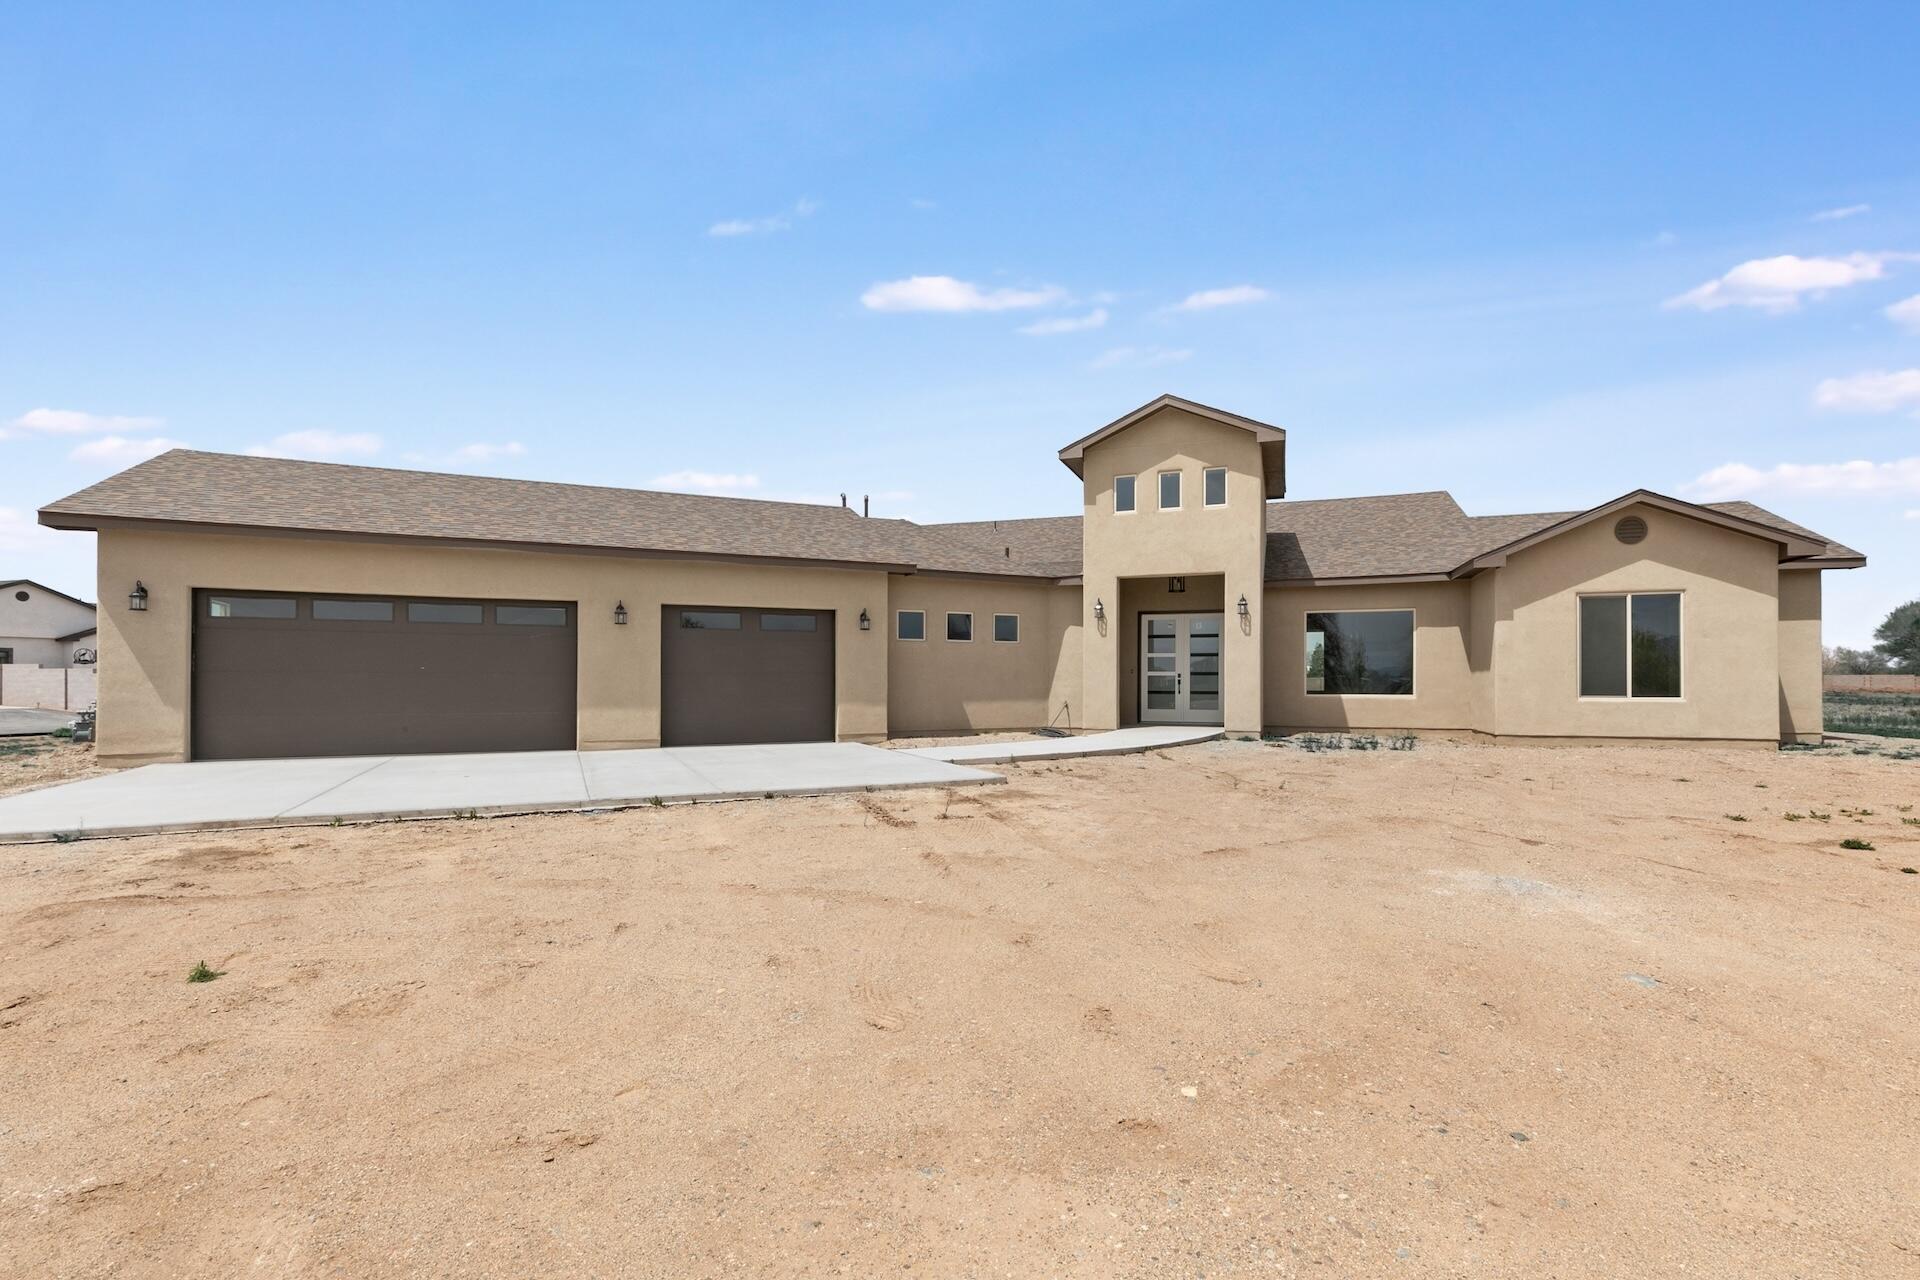 Stunning custom home located in a desirable gated neighborhood. This home sits on a beautiful 1.5 acres with an oversized 3 car garage and grande entryway. As you walk into the foyer you will find a large living space and open kitchen with plenty of cabinet and pantry space. Owners suite is has its own private entrance to the covered patio, perfect location to watch the NM sunsets!  Granite counter tops and custom title floors throughout the home. Schedule your showing today!